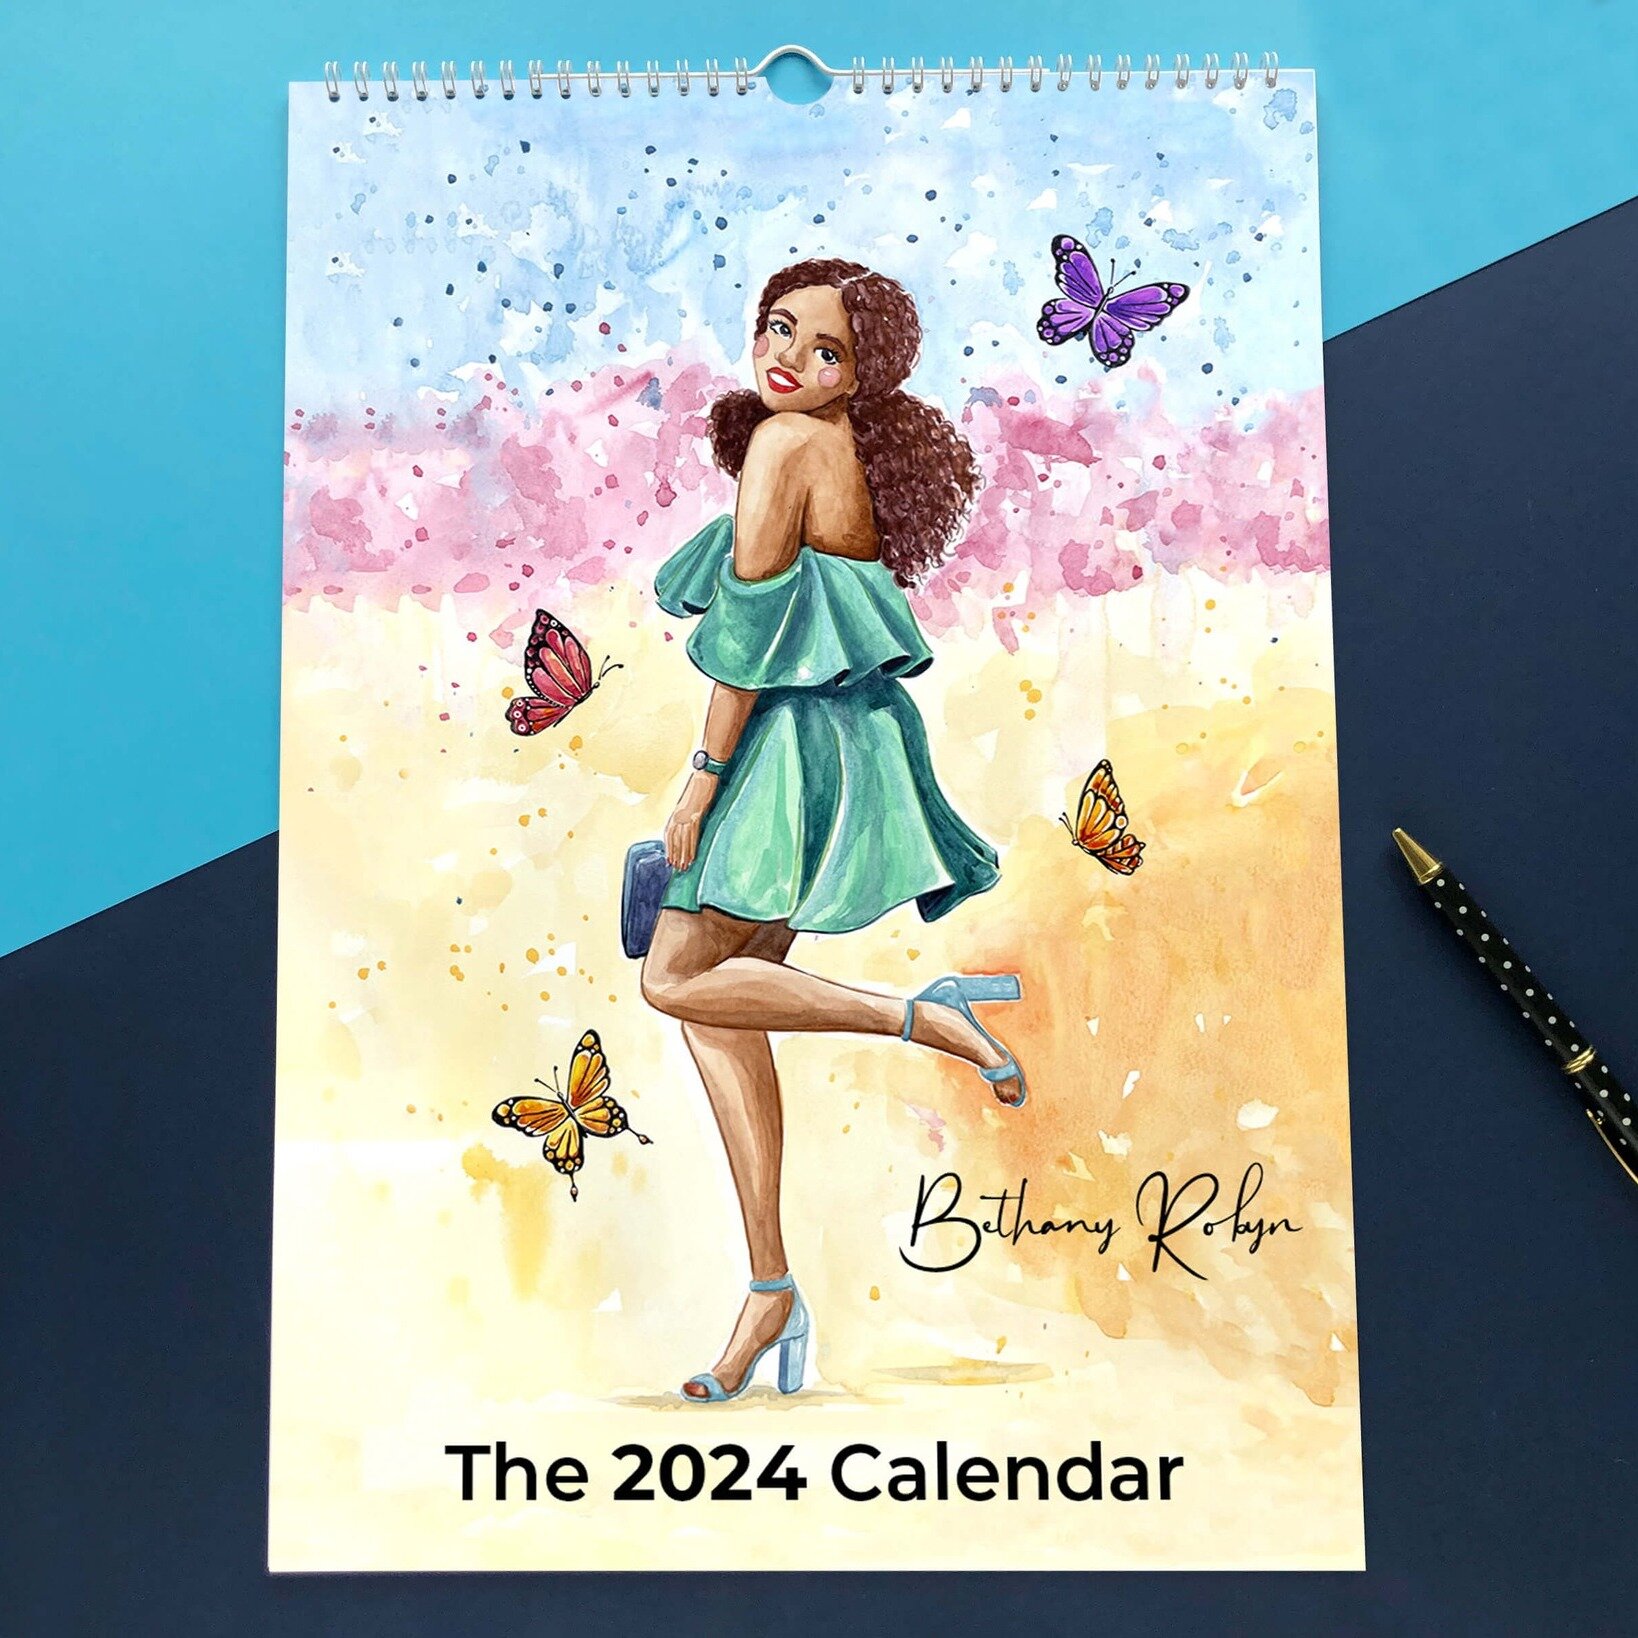 My 2024 Calendar is finally ready for pre-order! 
A few weeks ago I wasn't sure I'd actually have time to finish it before the new year, due to pesky work getting in the way, but I am so glad (and relieved) to say it is ready! I think Tish, my August